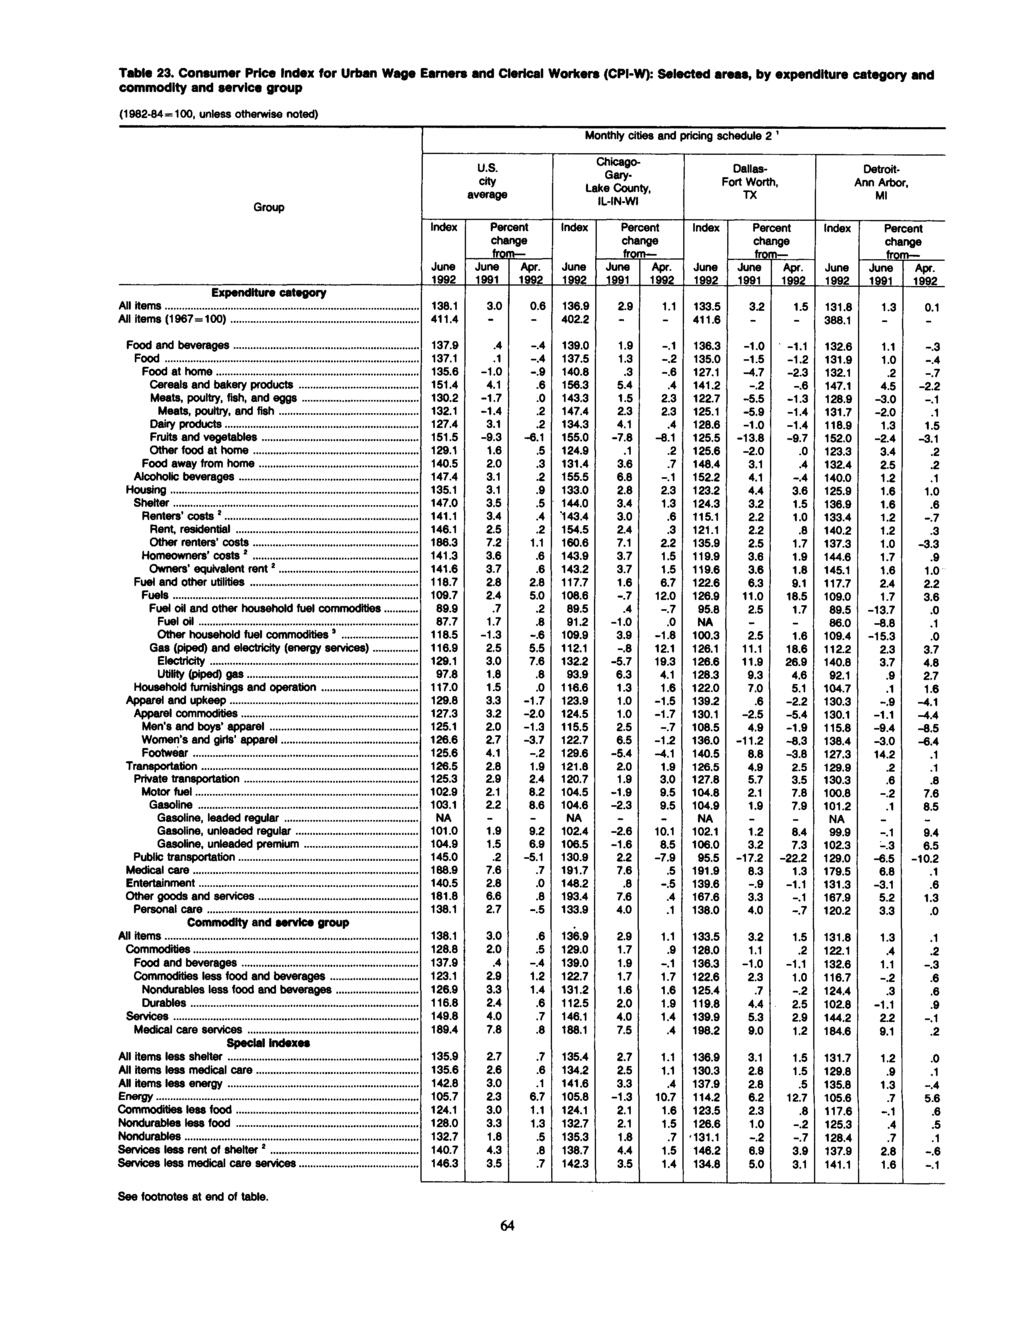 Table 23. Consumer Price for Urban Wage Earners and Clerical Workers (CPI-W): Selected areas, by expenditure category and commodity and service group Group U.S. city average Percent Apr.